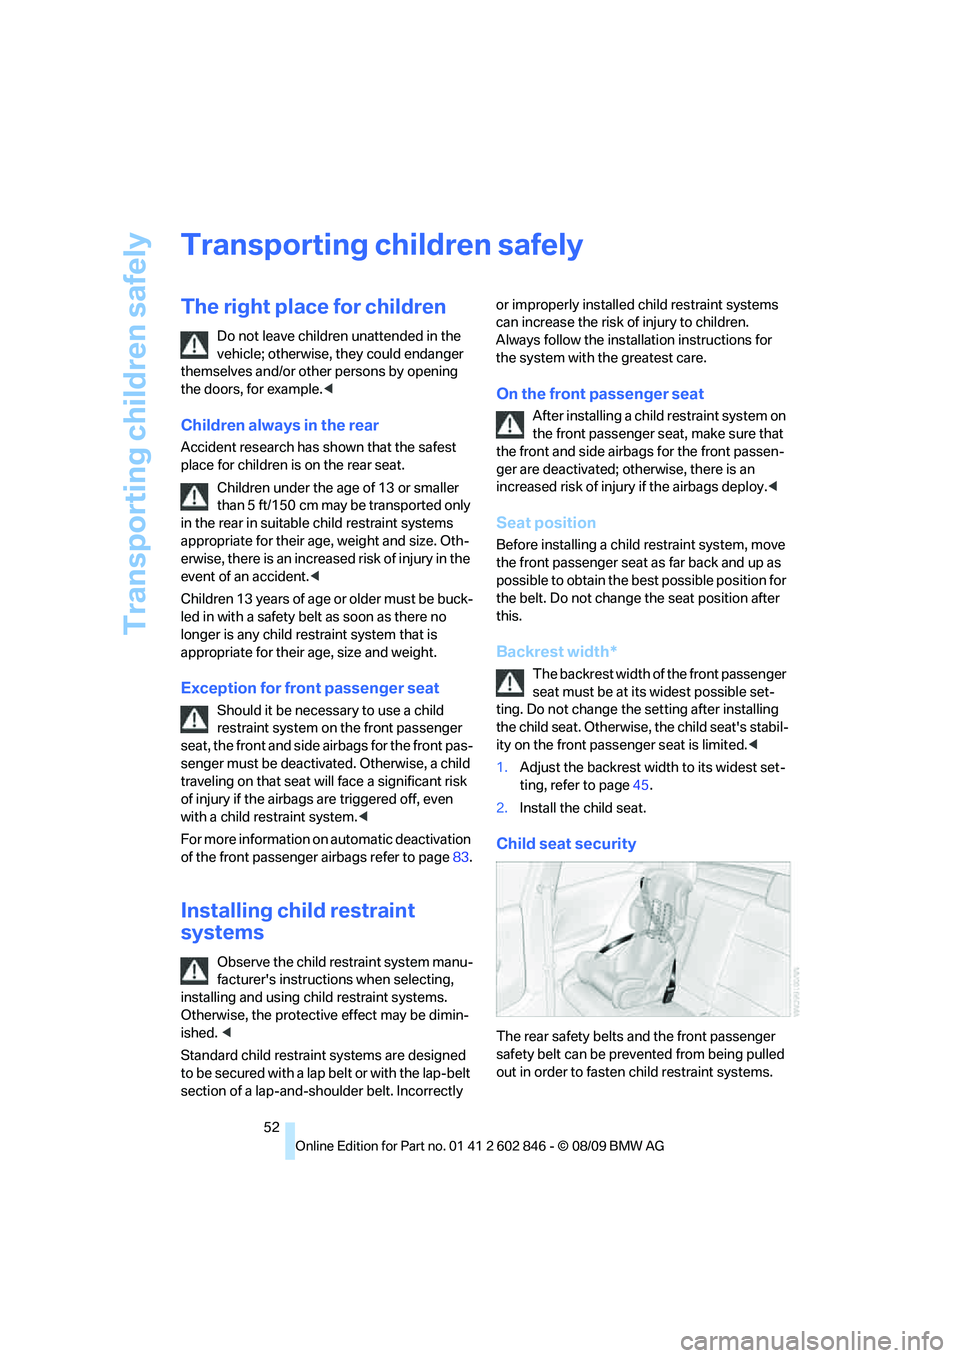 BMW 128I CONVERTIBLE 2010  Owners Manual Transporting children safely
52
Transporting children safely
The right place for children
Do not leave children unattended in the 
vehicle; otherwise, they could endanger 
themselves and/or other pers